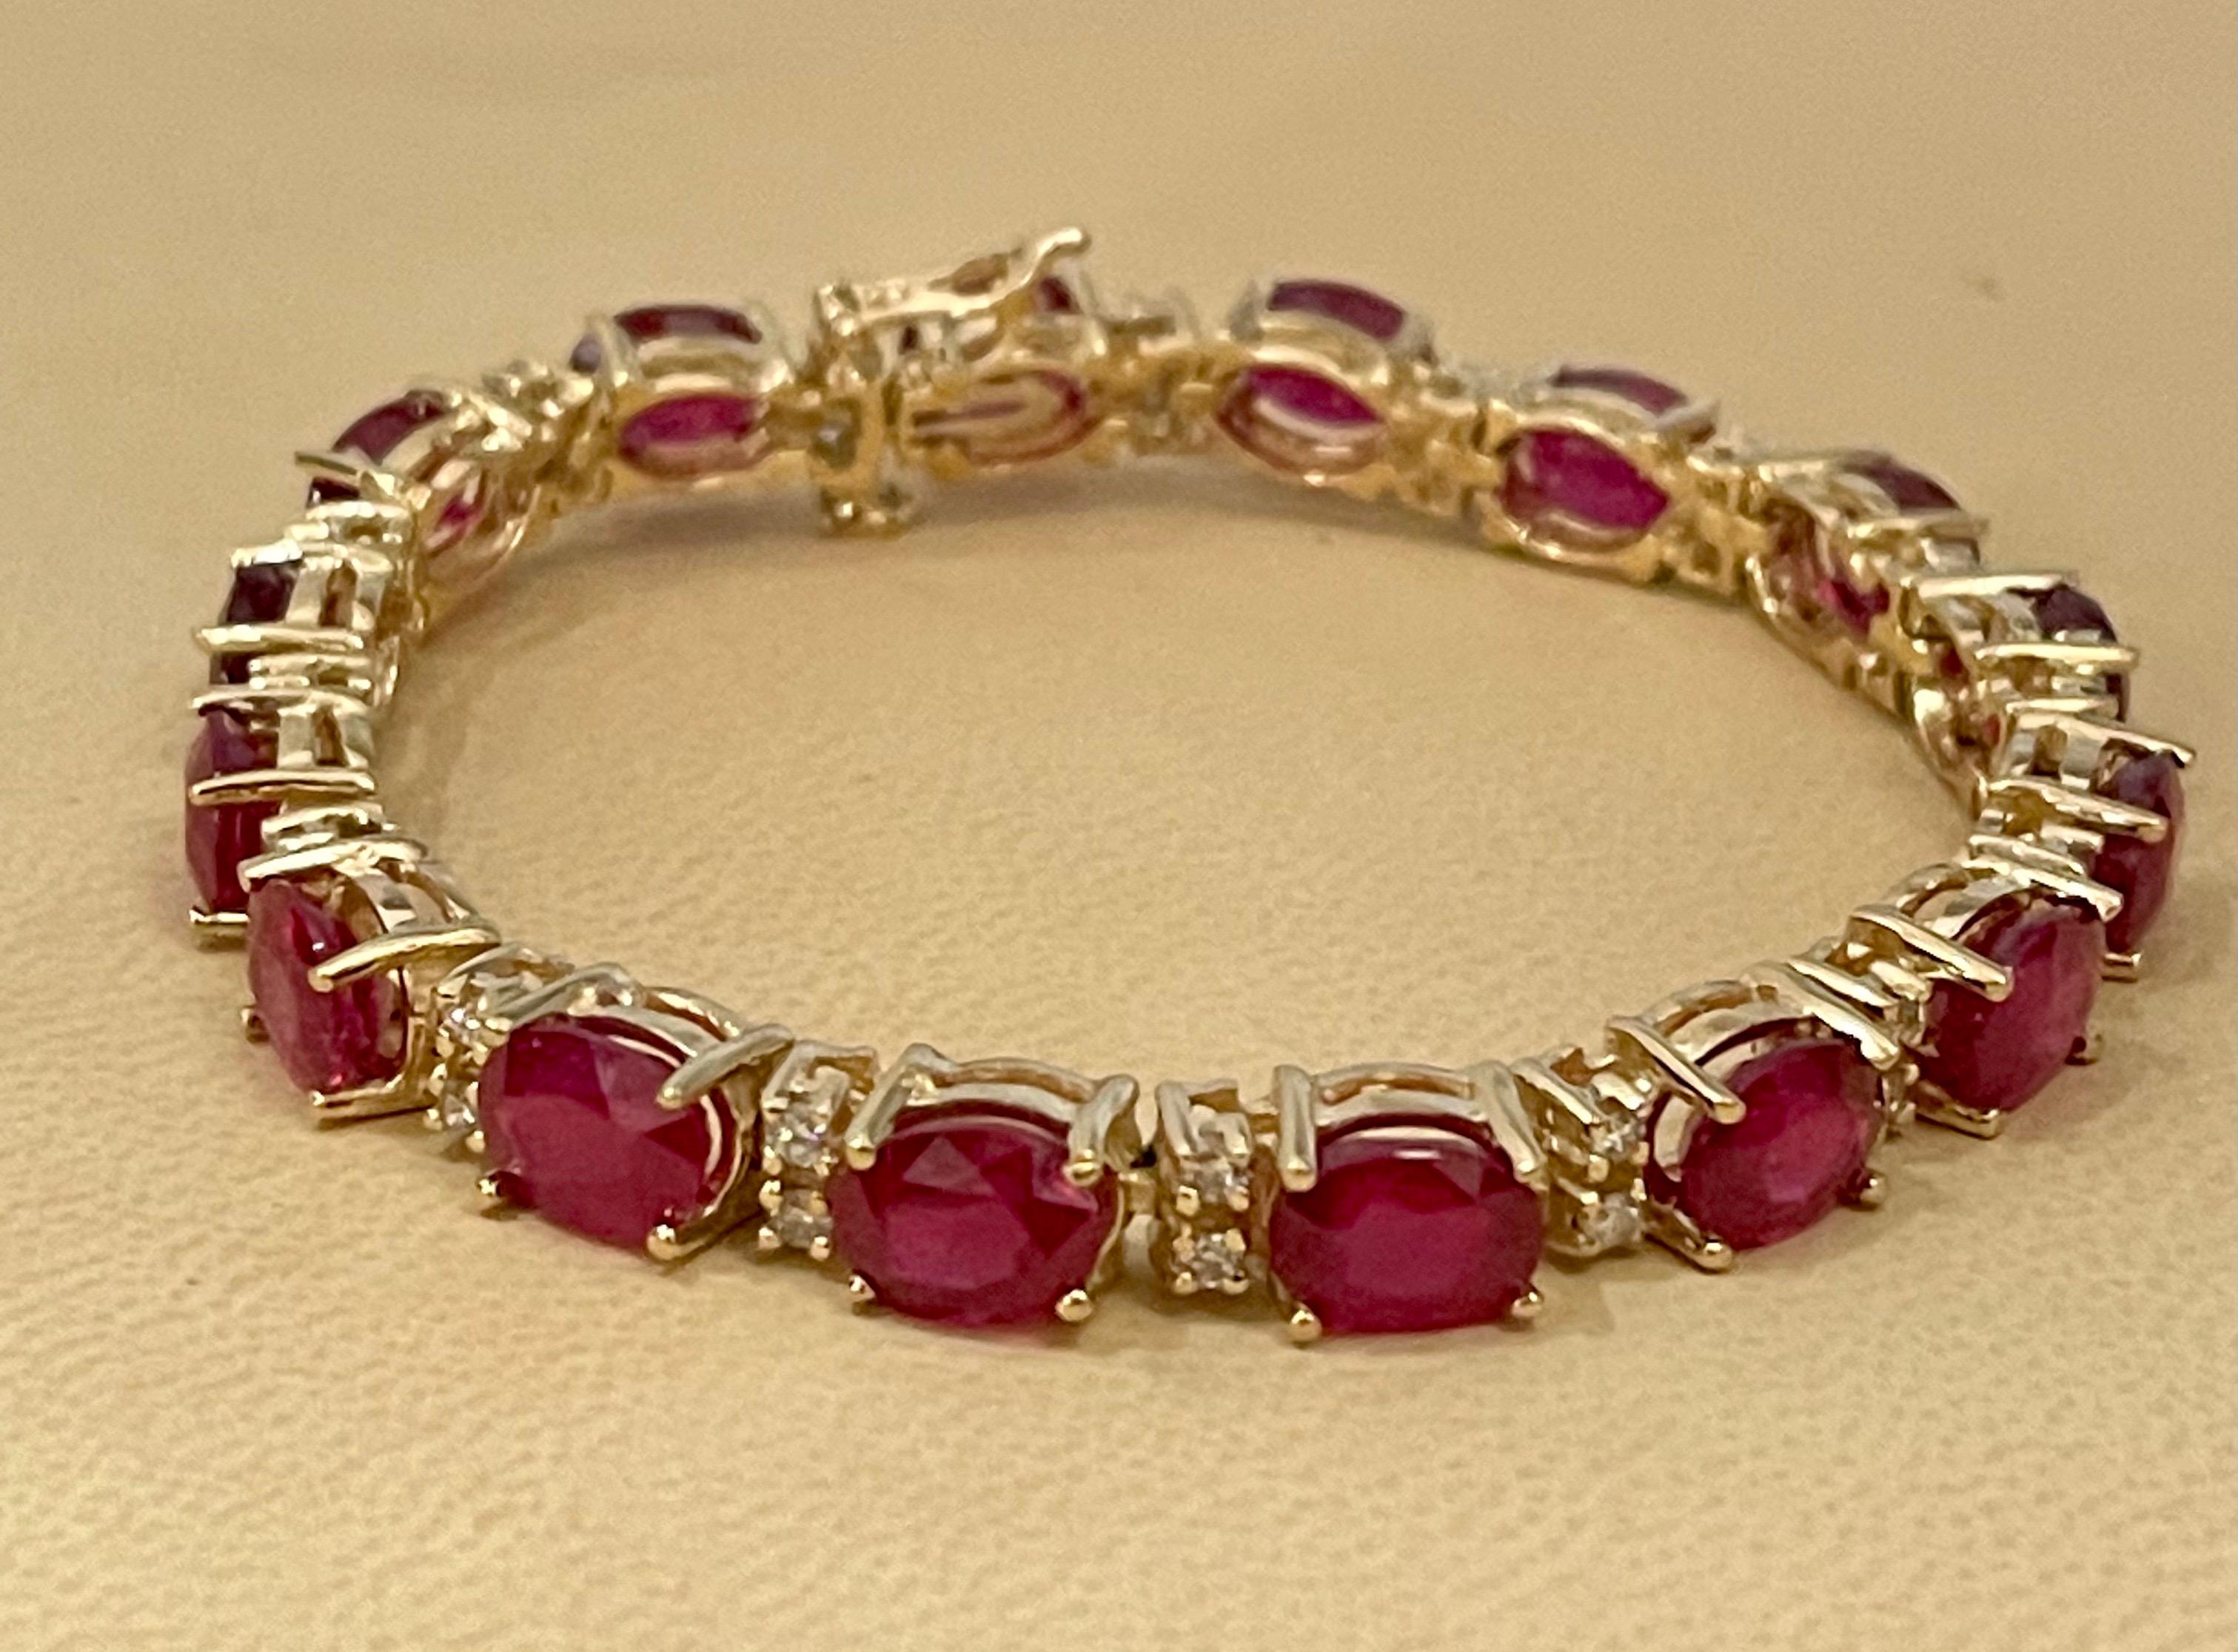  This exceptionally affordable Tennis  bracelet has  16 stones of oval  Treated  Rubies  . 
Ruby is Treated. The weight of the Ruby is 24 Carat , Each ruby is approximately 1.5 ct , measuring 6X9 MM
Each Ruby is spaced by two diamonds .Total number